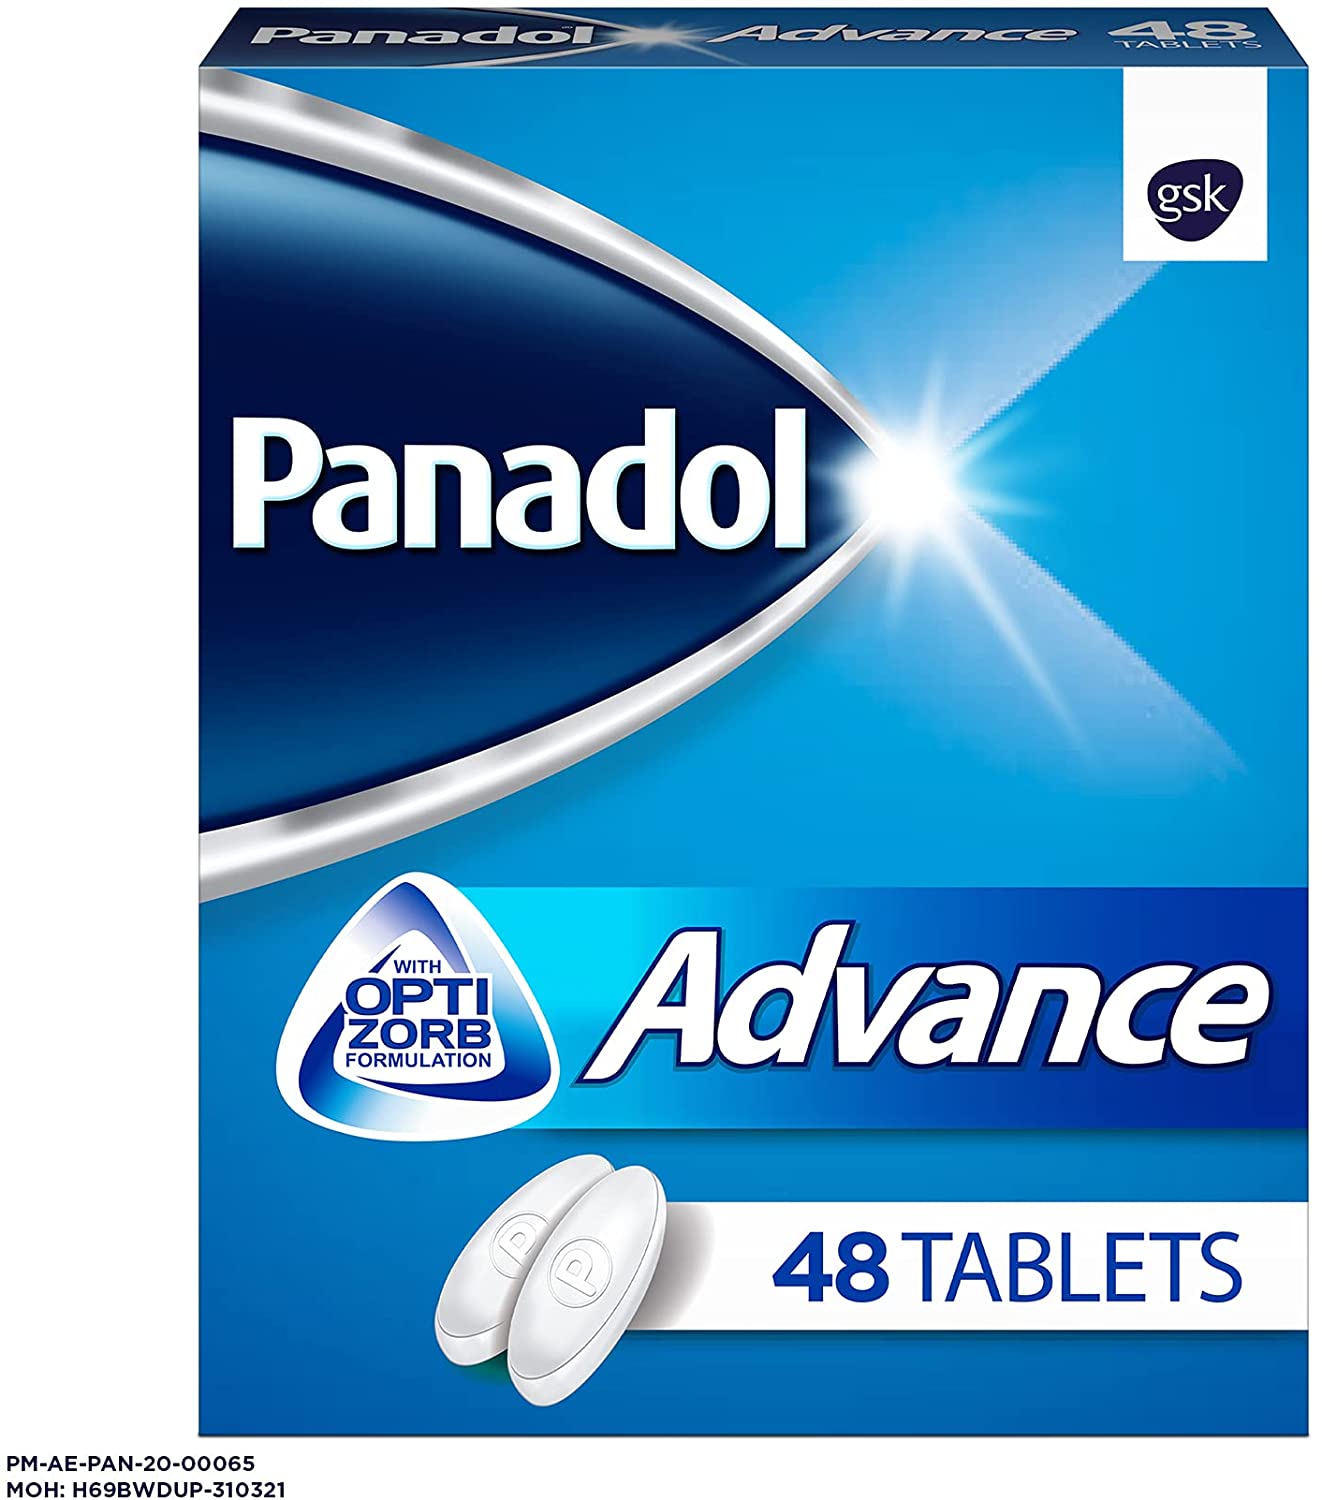 Panadol Advance with Optizorb for Fast Pain Relief for Headaches, Toothaches & Period Pain, 48 Tablets